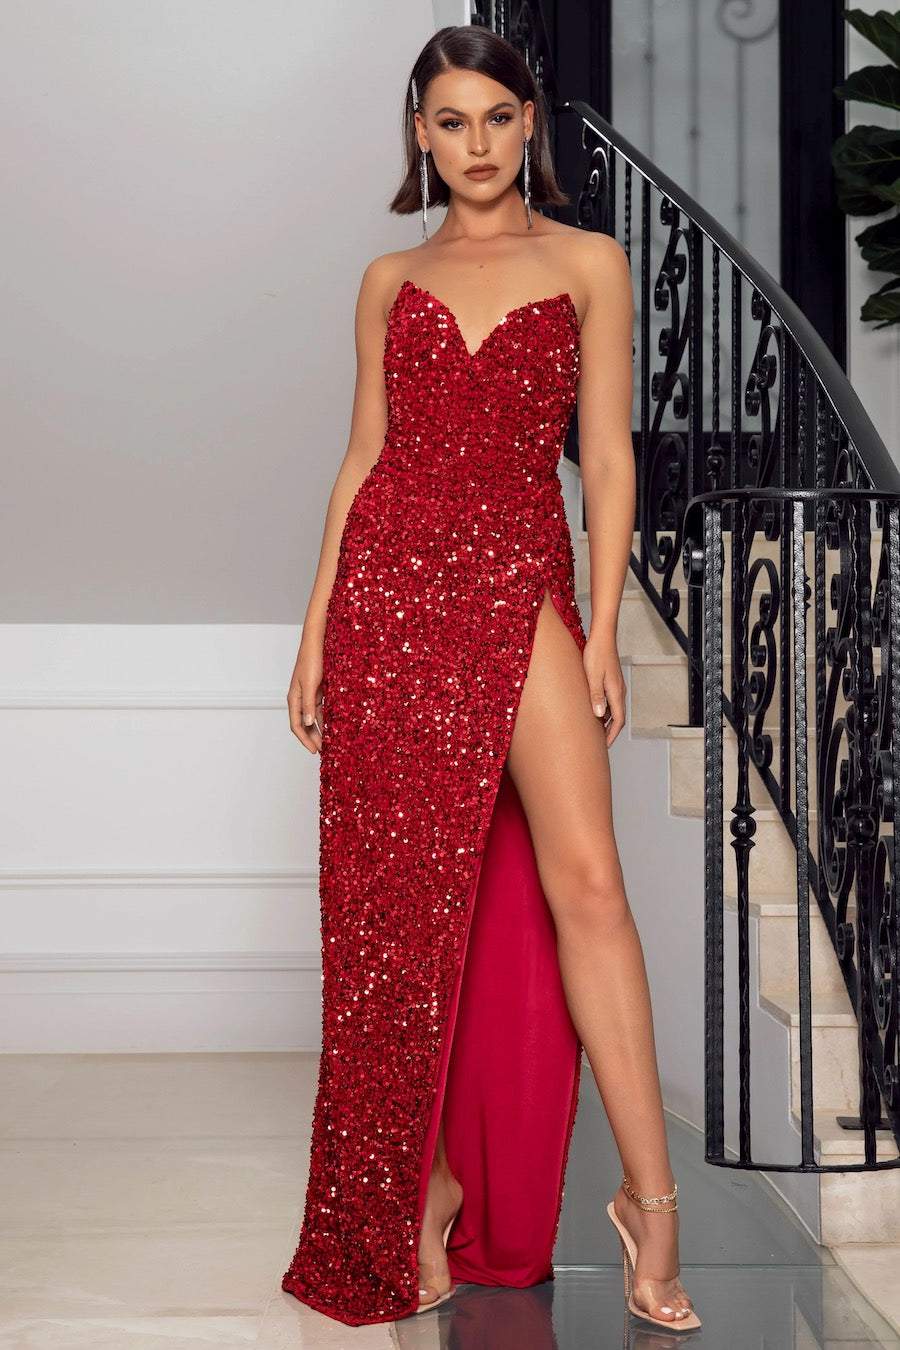 RED GLOSS EVENING DRESS-danddclothing-Classic Elegant Gowns,Evening Dresses,Long